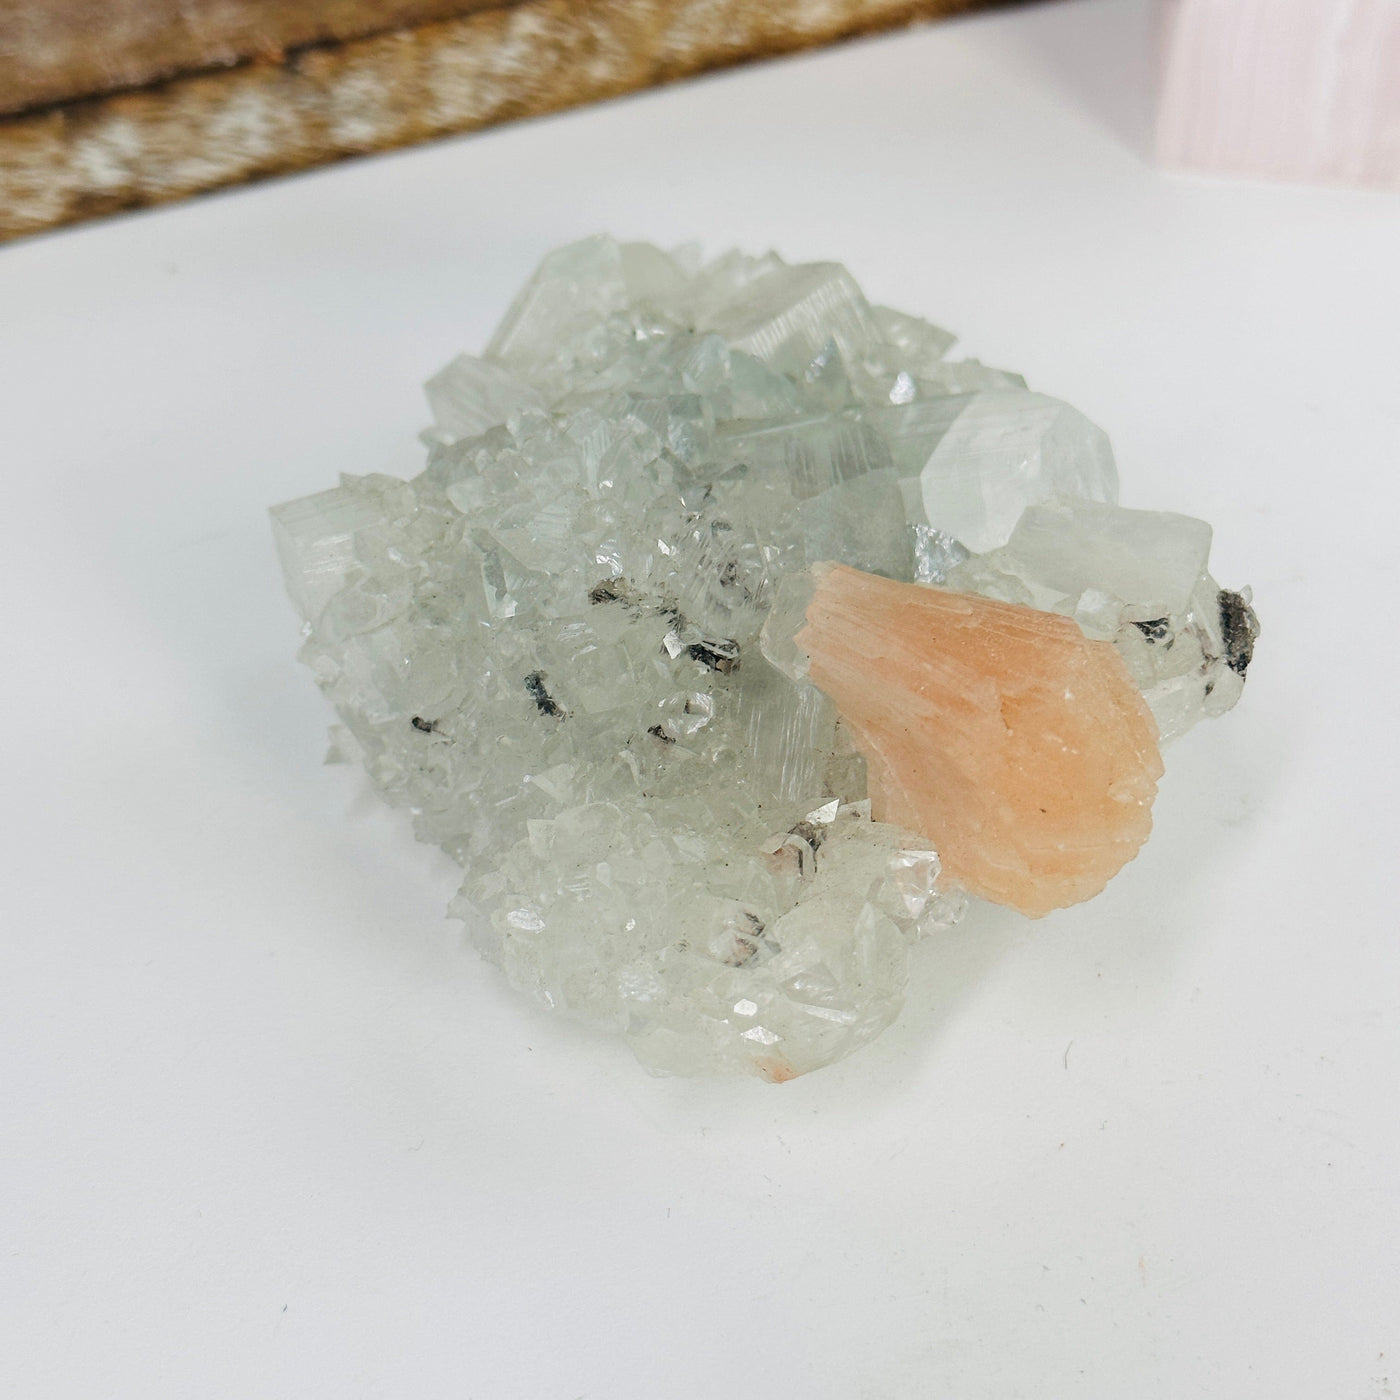 peach apophyllite with Stilbite with decorations in the background